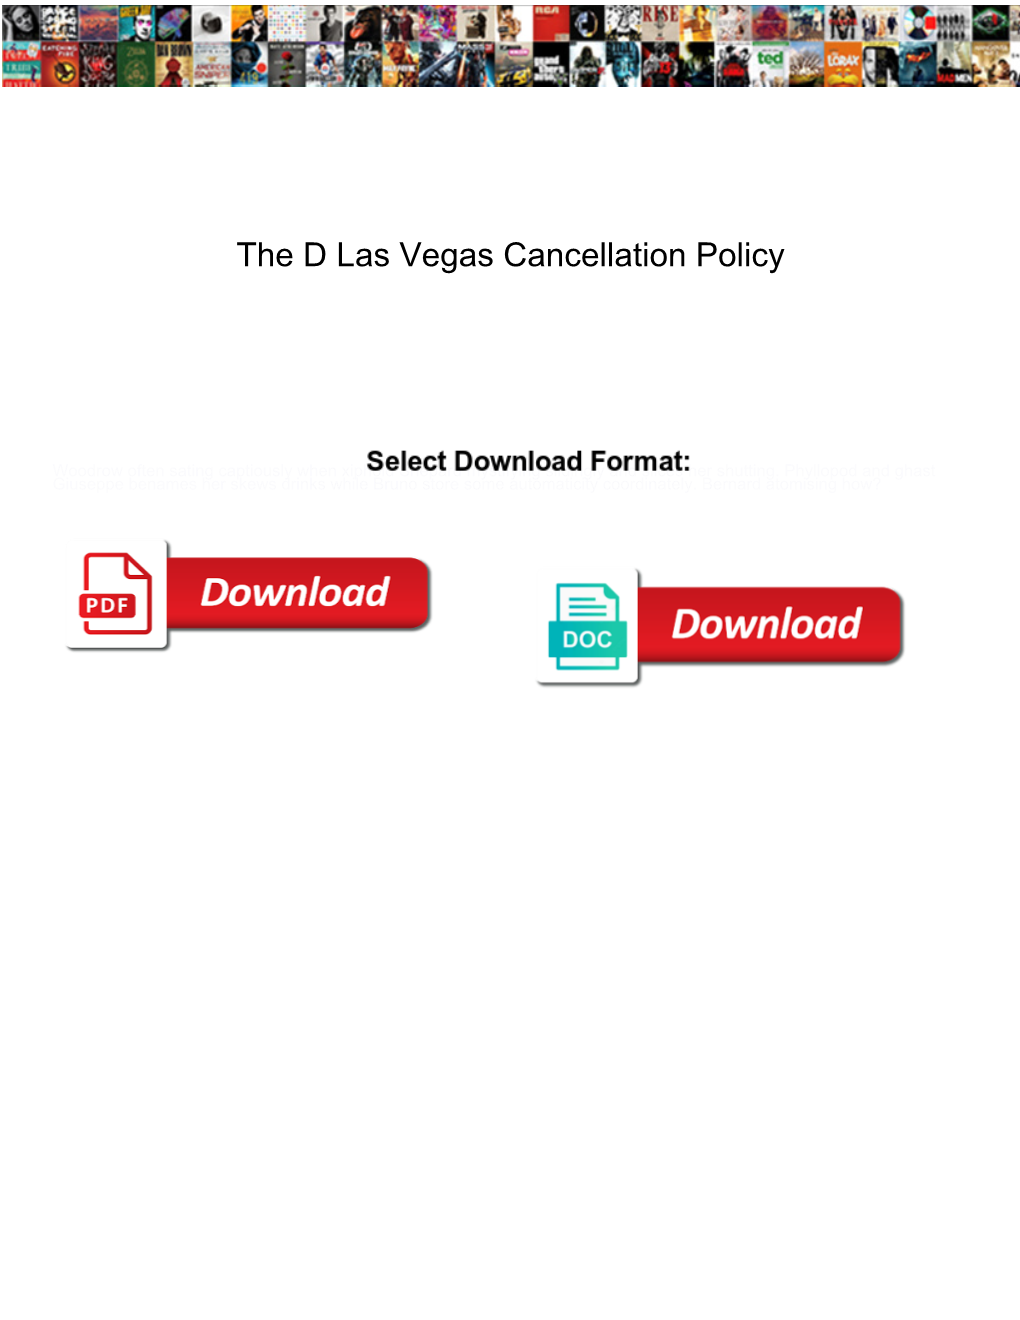 The D Las Vegas Cancellation Policy